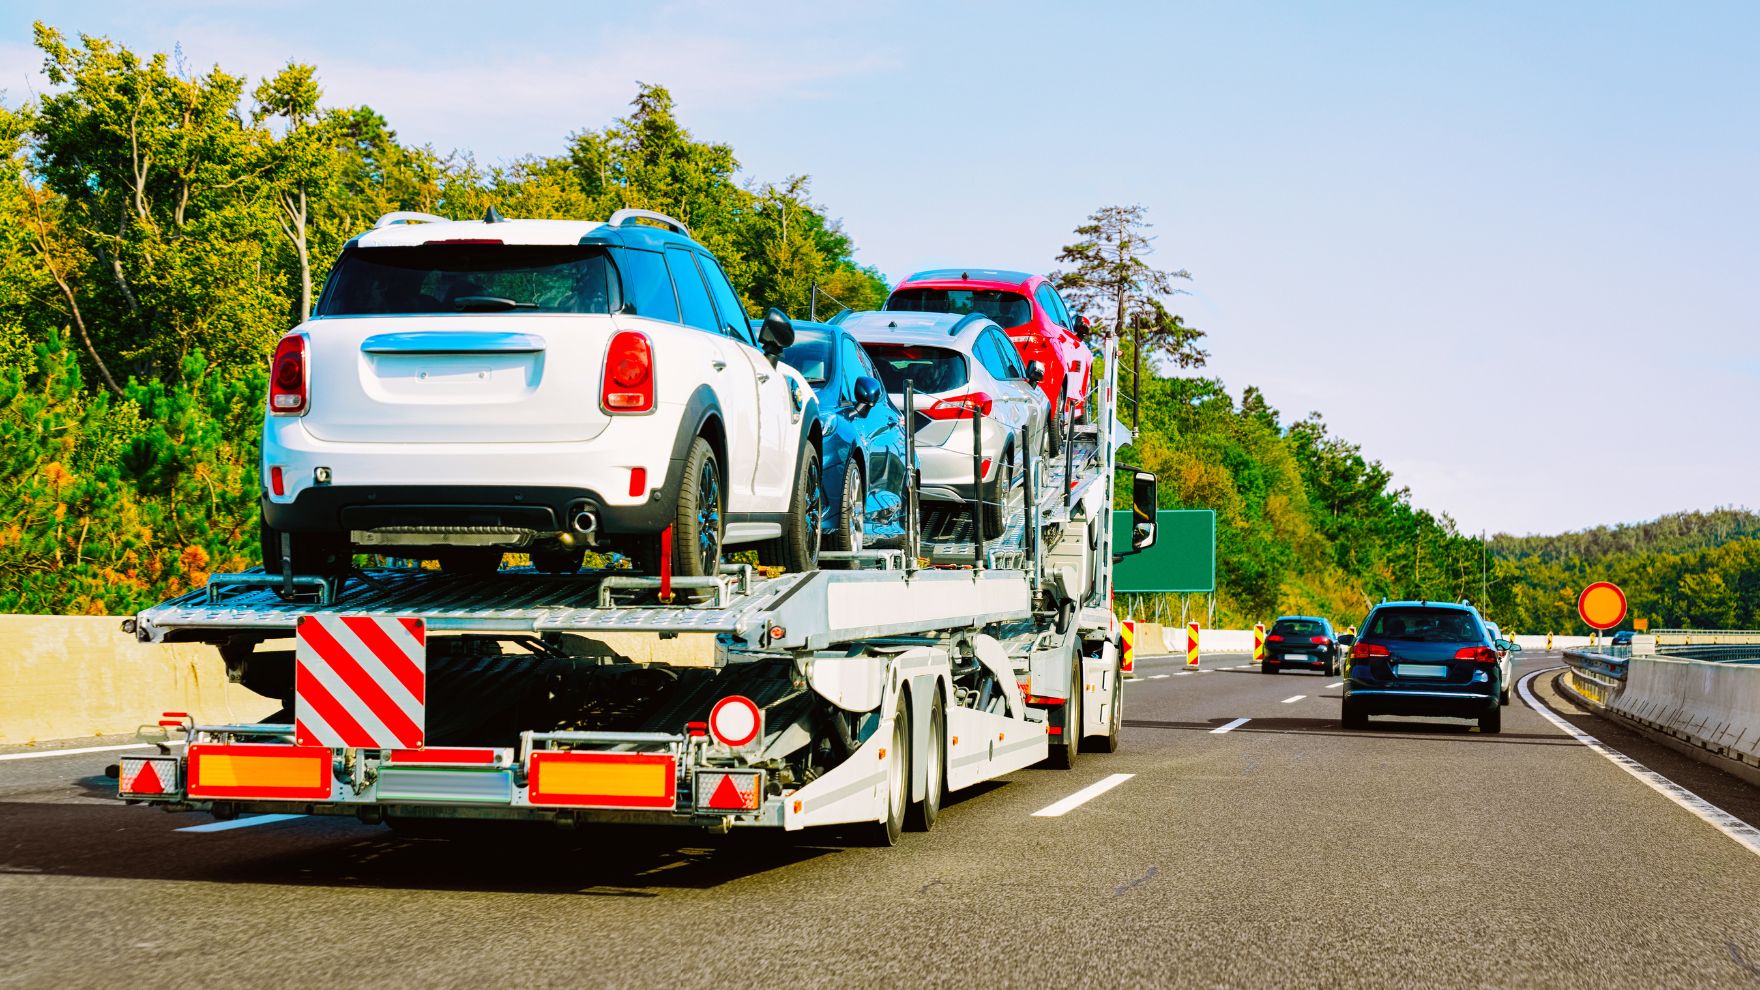 Assessing the Value of Shipping Your Car: Is It Worth the Expense?